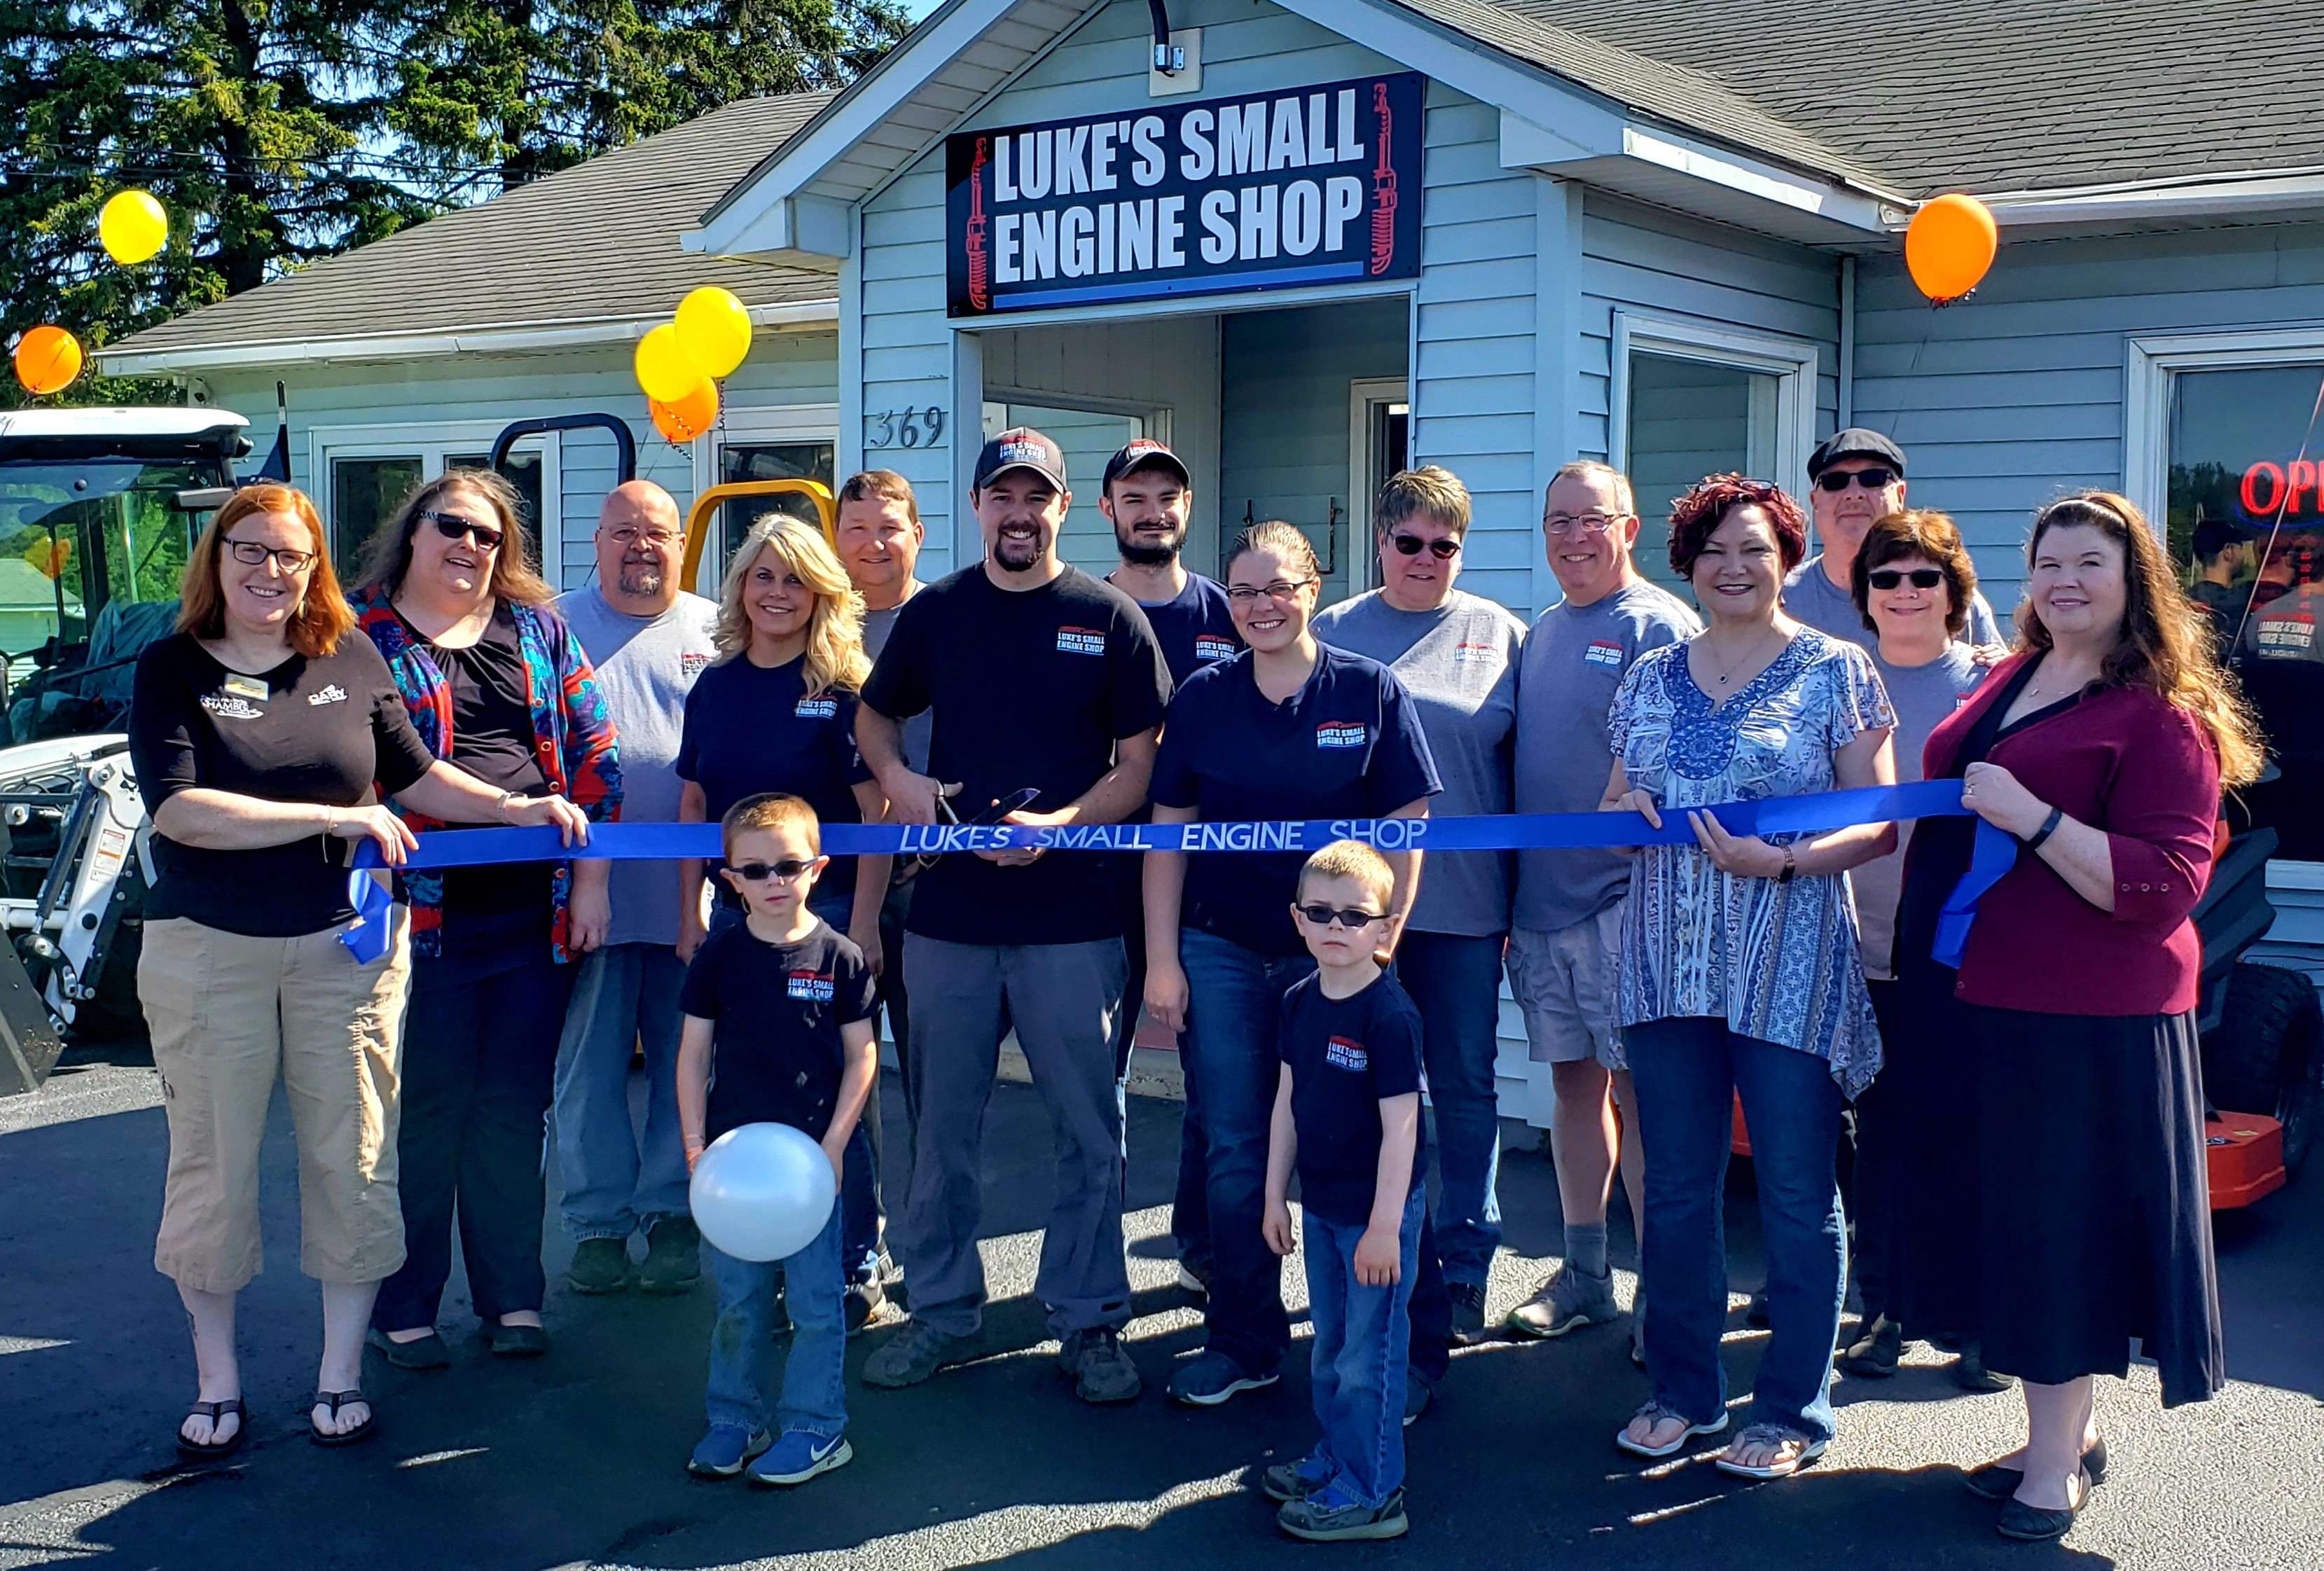 A group of people stands in front of a ceremonial ribbon as the man in the middle, holding a giant pair of scissors smiles at the camera. A sign on the building behind them says Lukes Small Engine Shop.